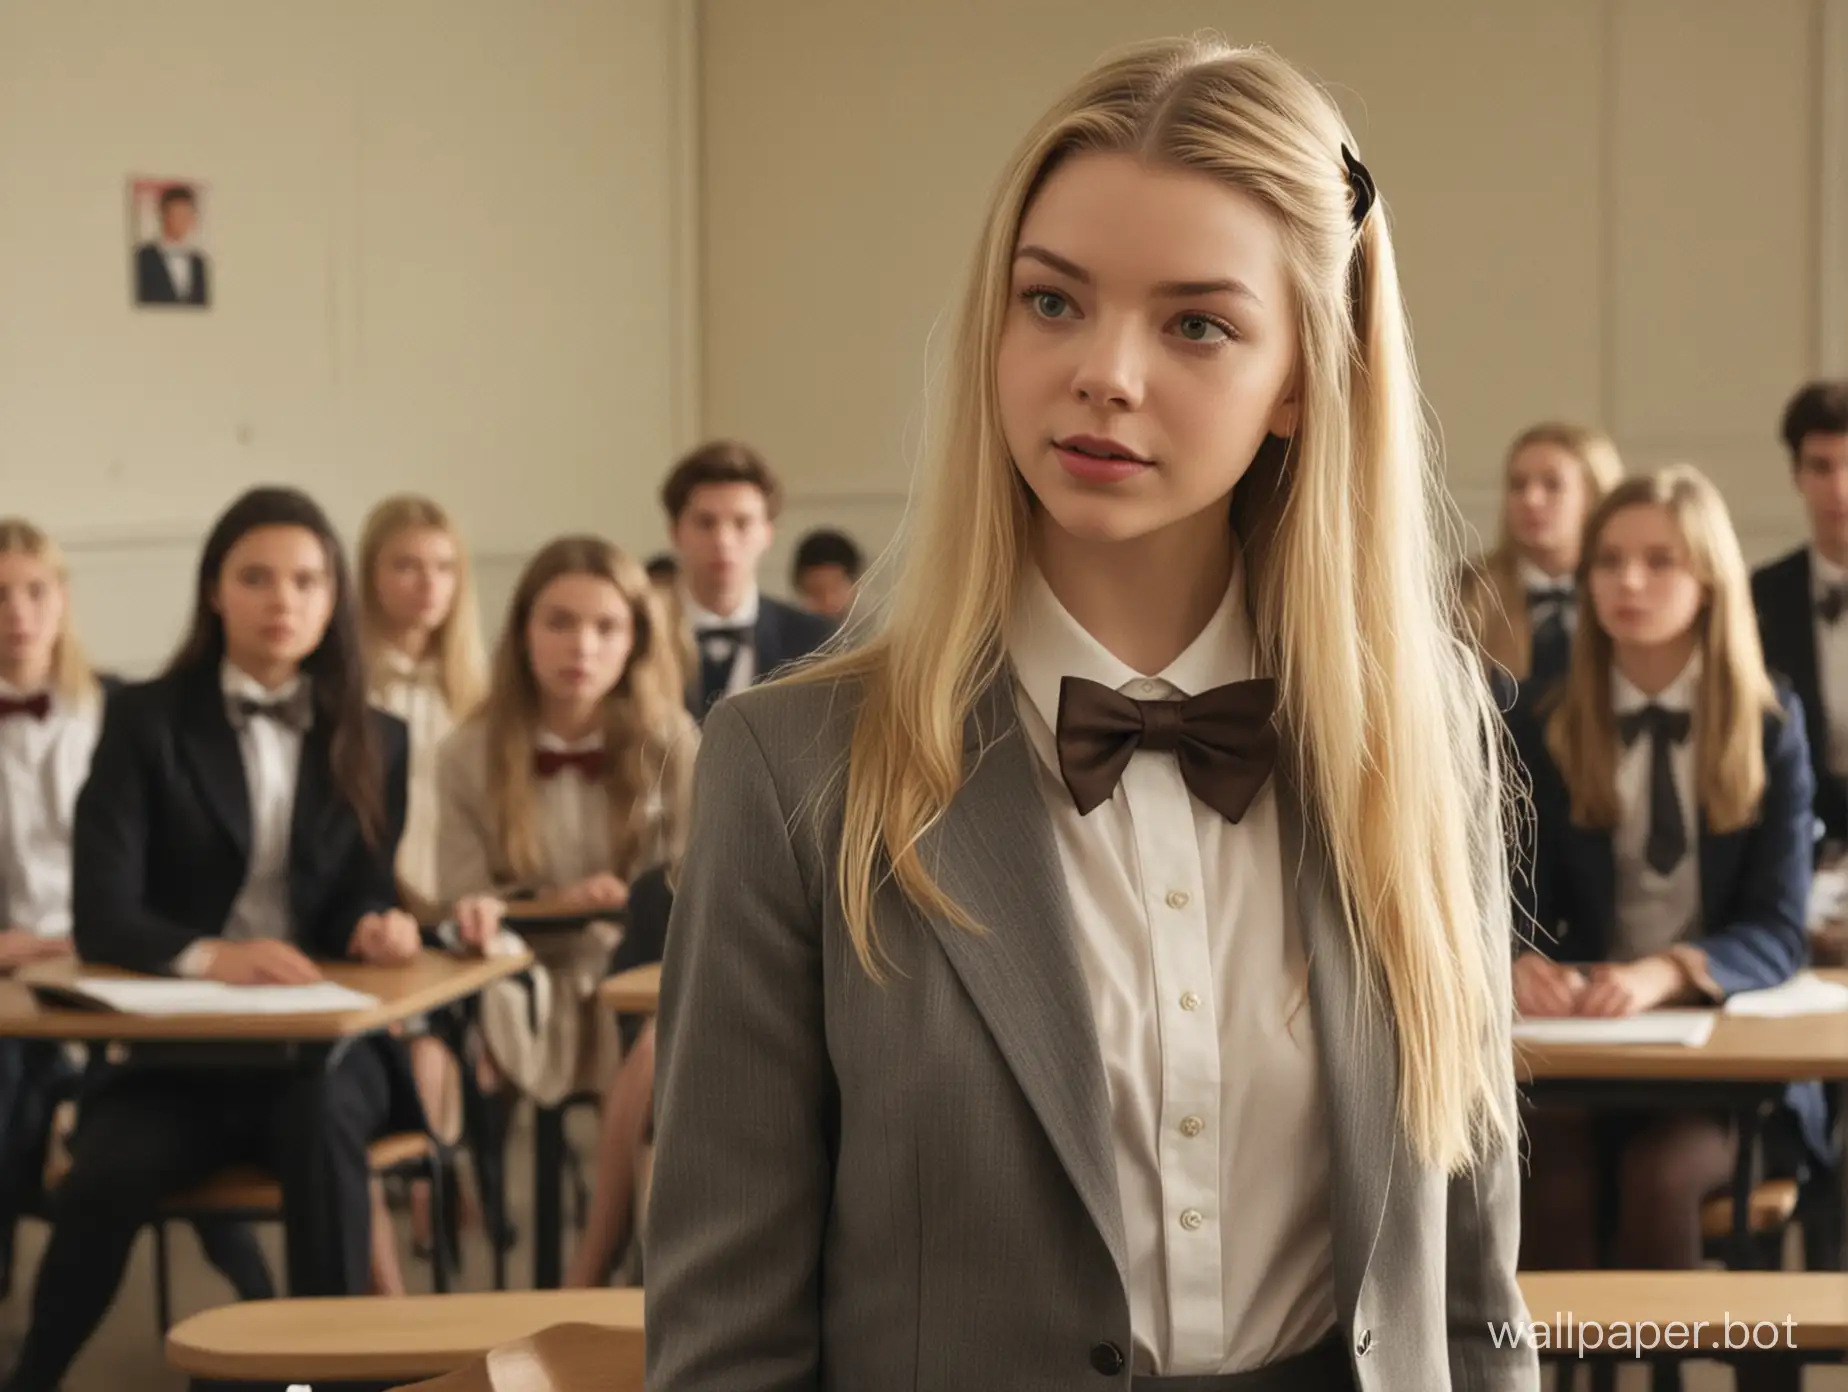 Elegant-Student-Anya-Taylor-Joy-with-Blonde-Hair-in-Classroom-Setting